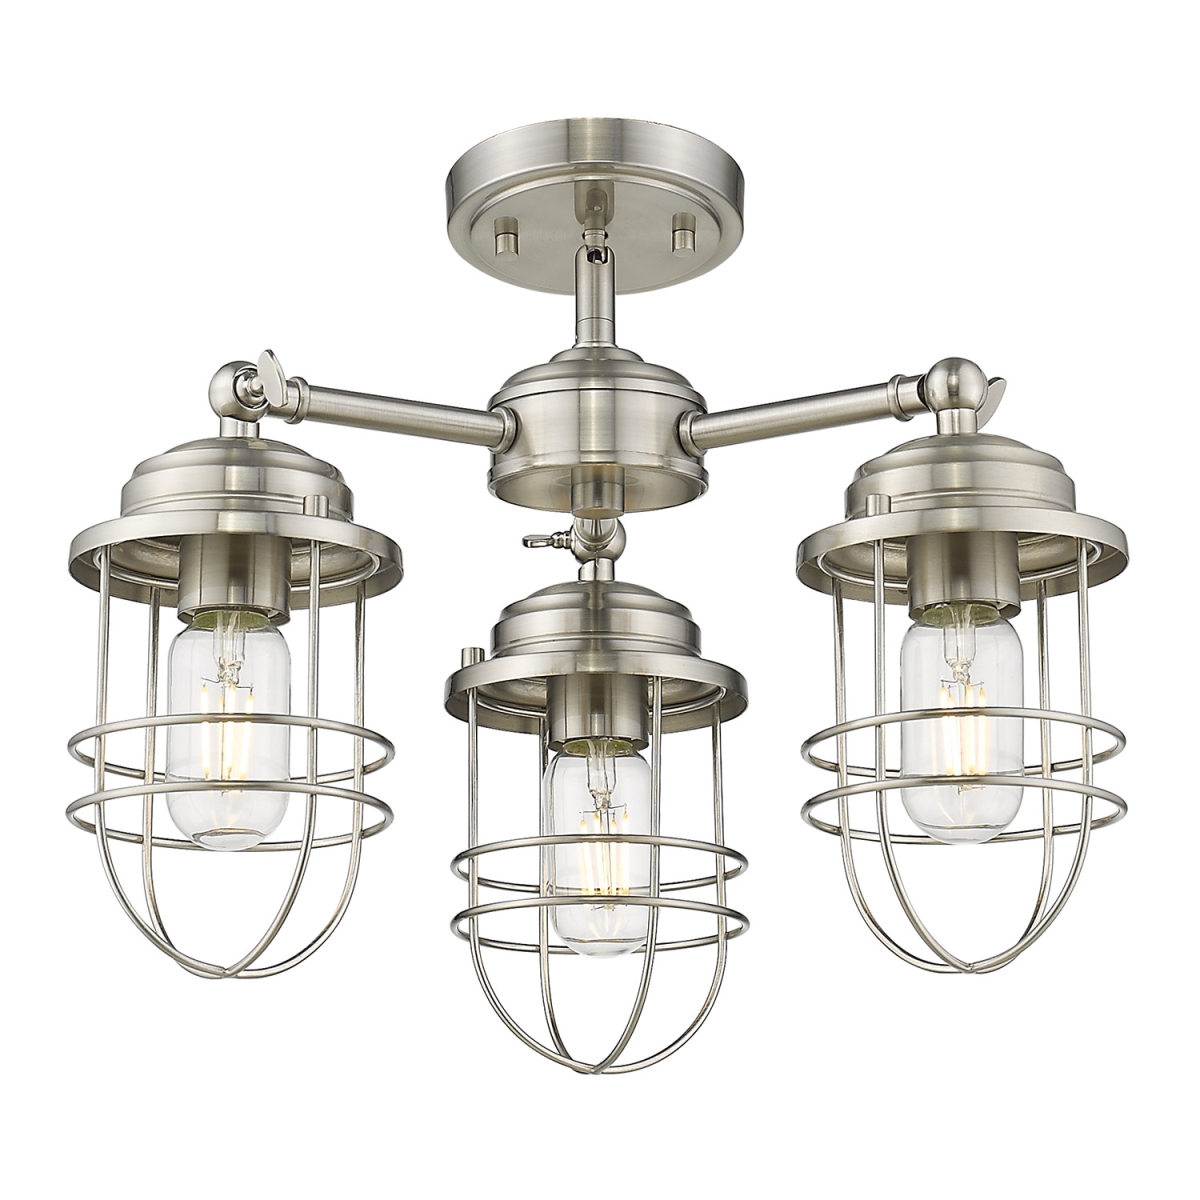 9808-3sf Pw 16 In. Seaport 3 Lights Pewter Semi-flush Mount Ceiling Light - Silver